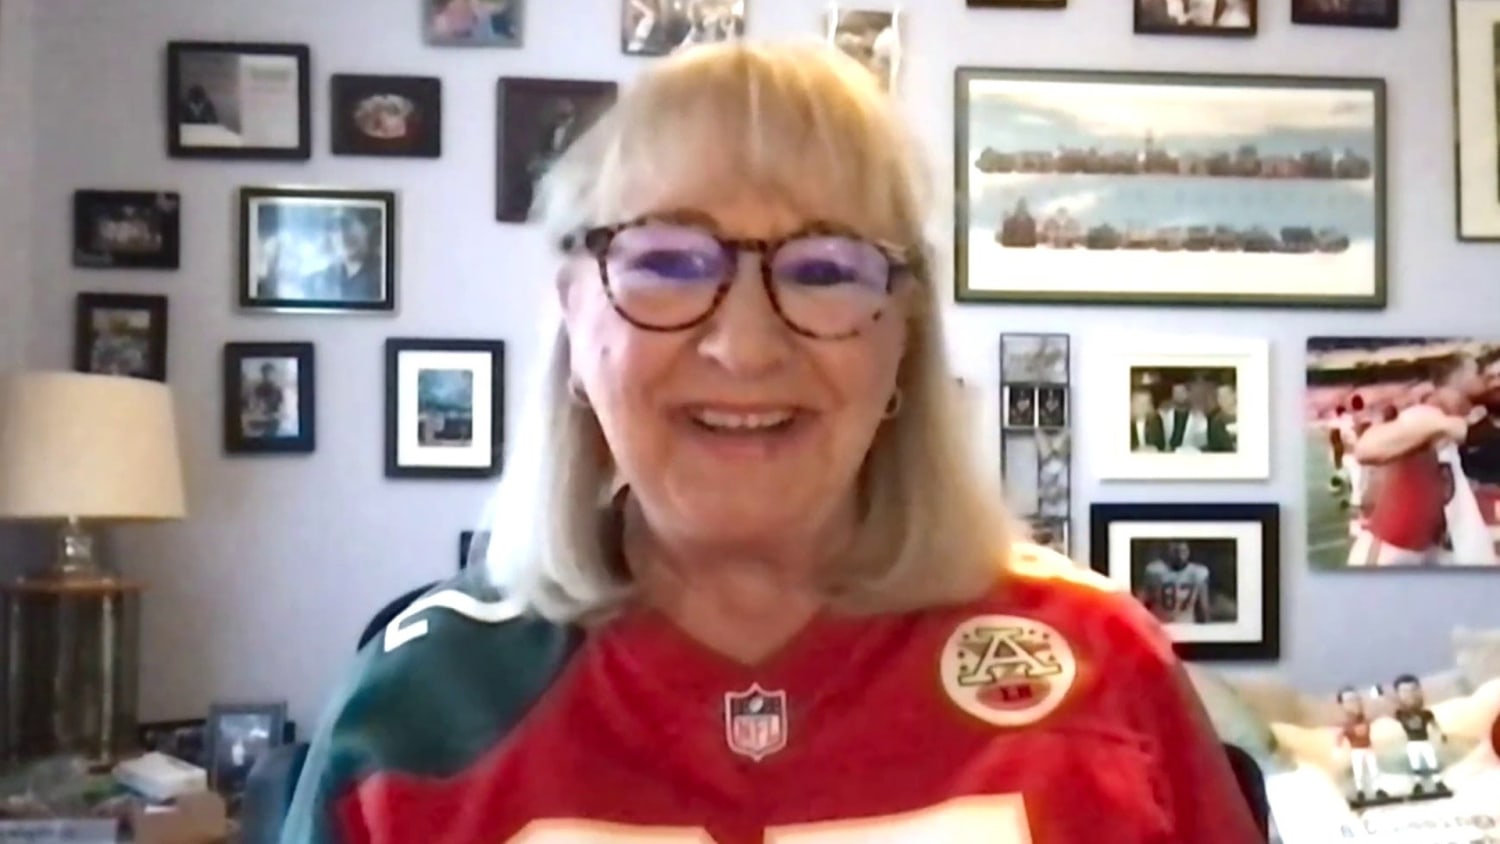 Mother of Travis, Jason Kelce wears great custom shoes, outfit to Super Bowl